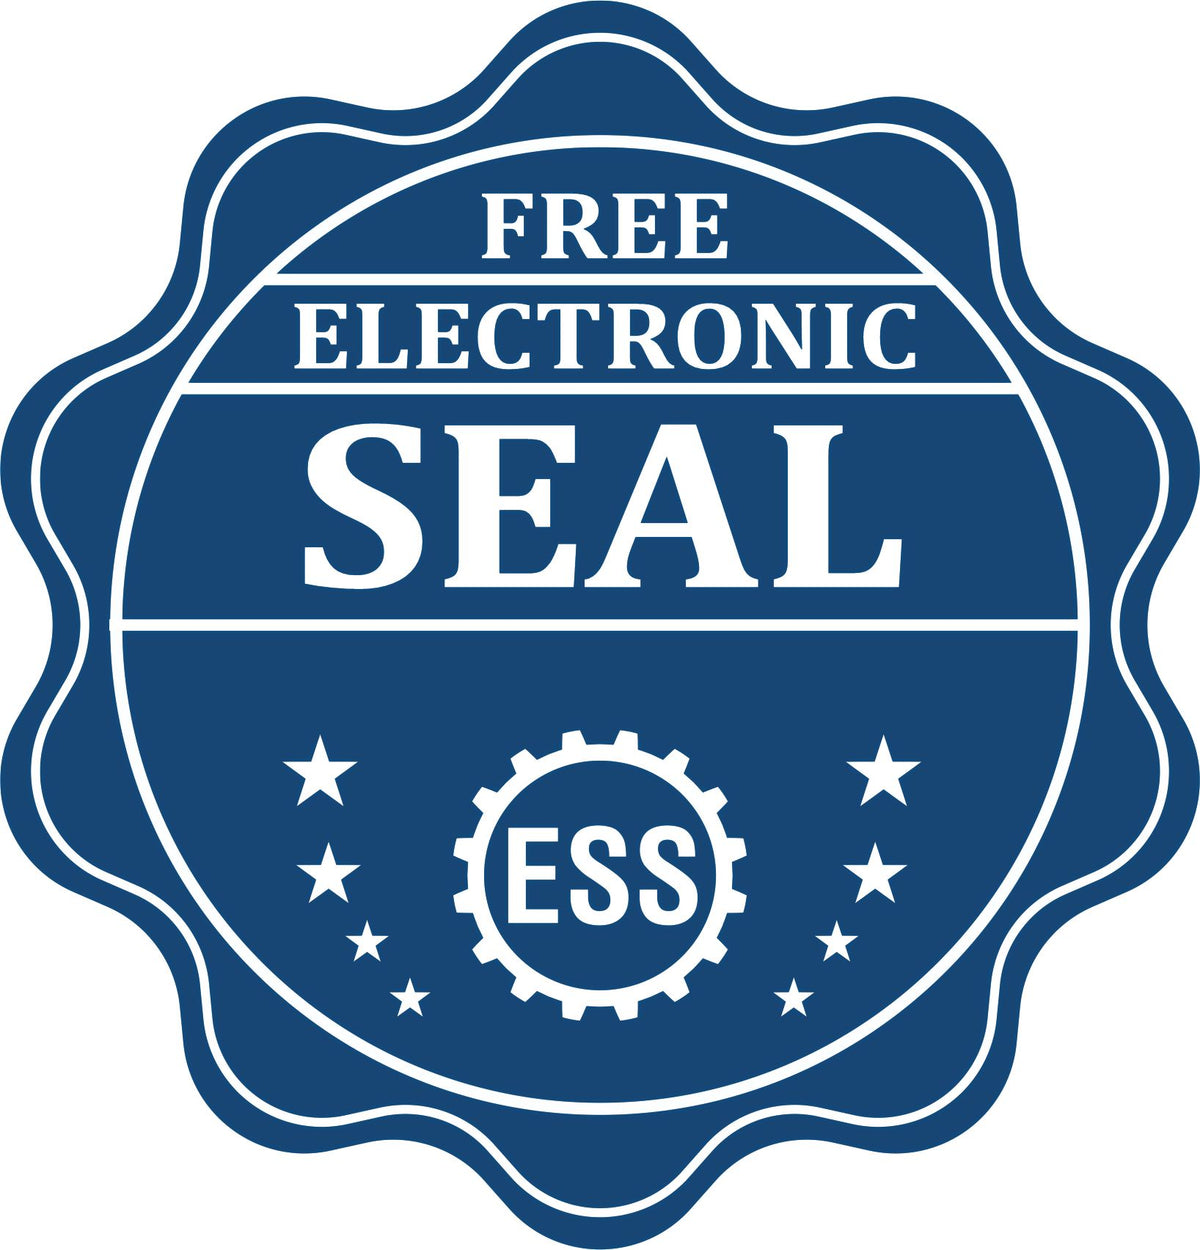 A badge showing a free electronic seal for the State of West Virginia Long Reach Architectural Embossing Seal with stars and the ESS gear on the emblem.